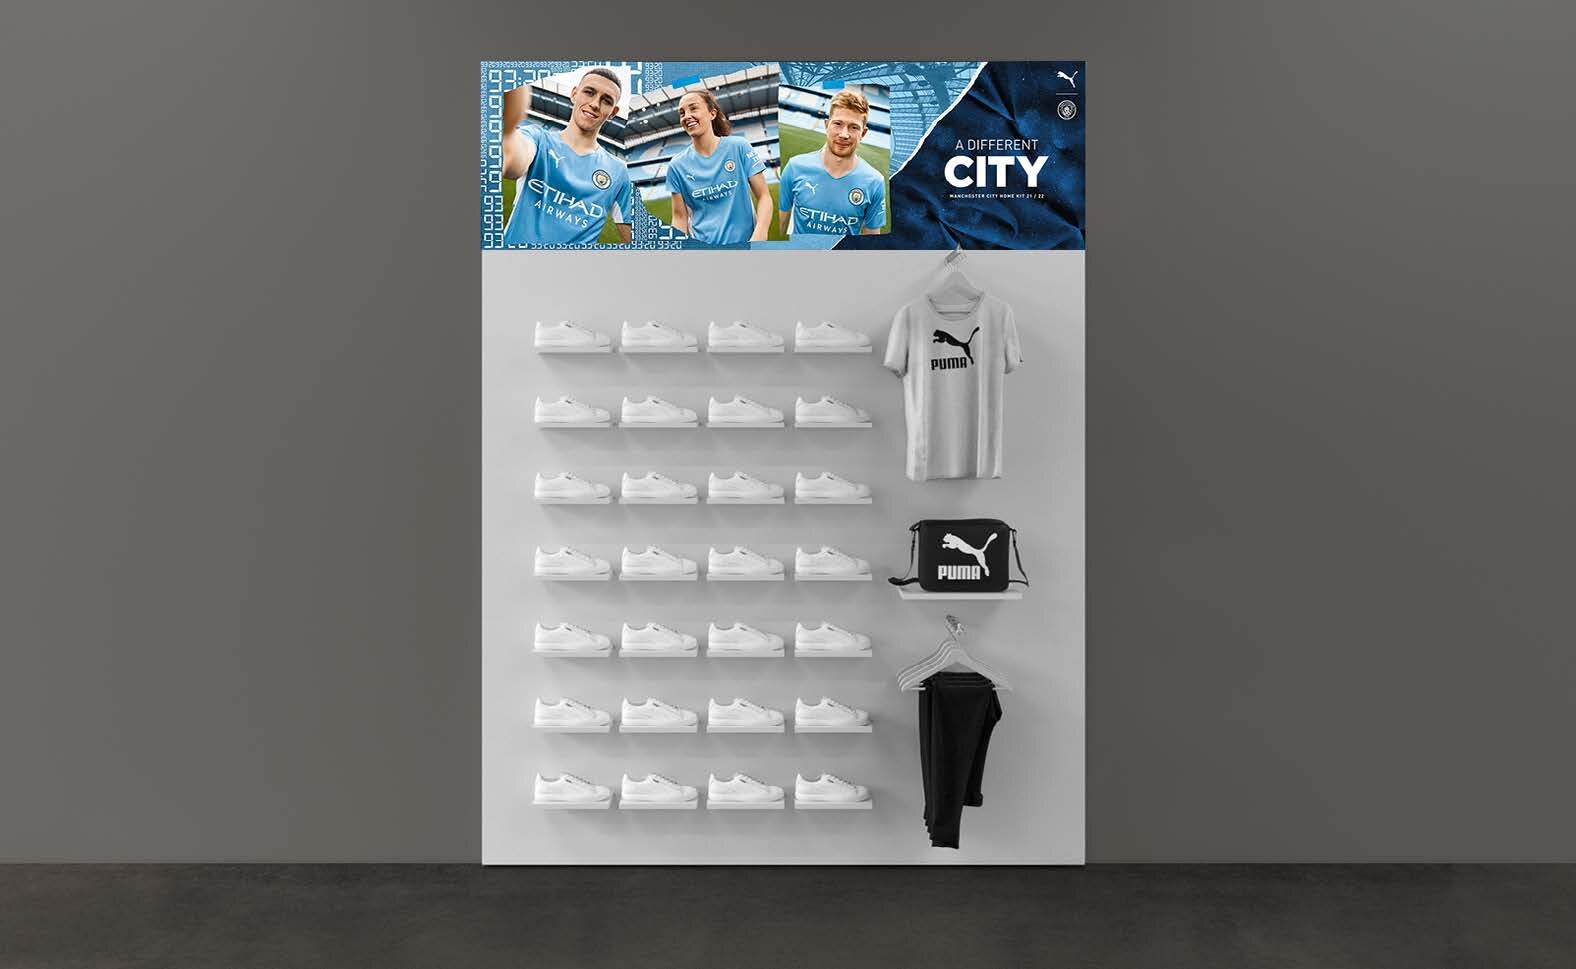 21AW_In-Store_TS_Football_Manchester-City_Home_Creative-Guidelines[1]3.jpg